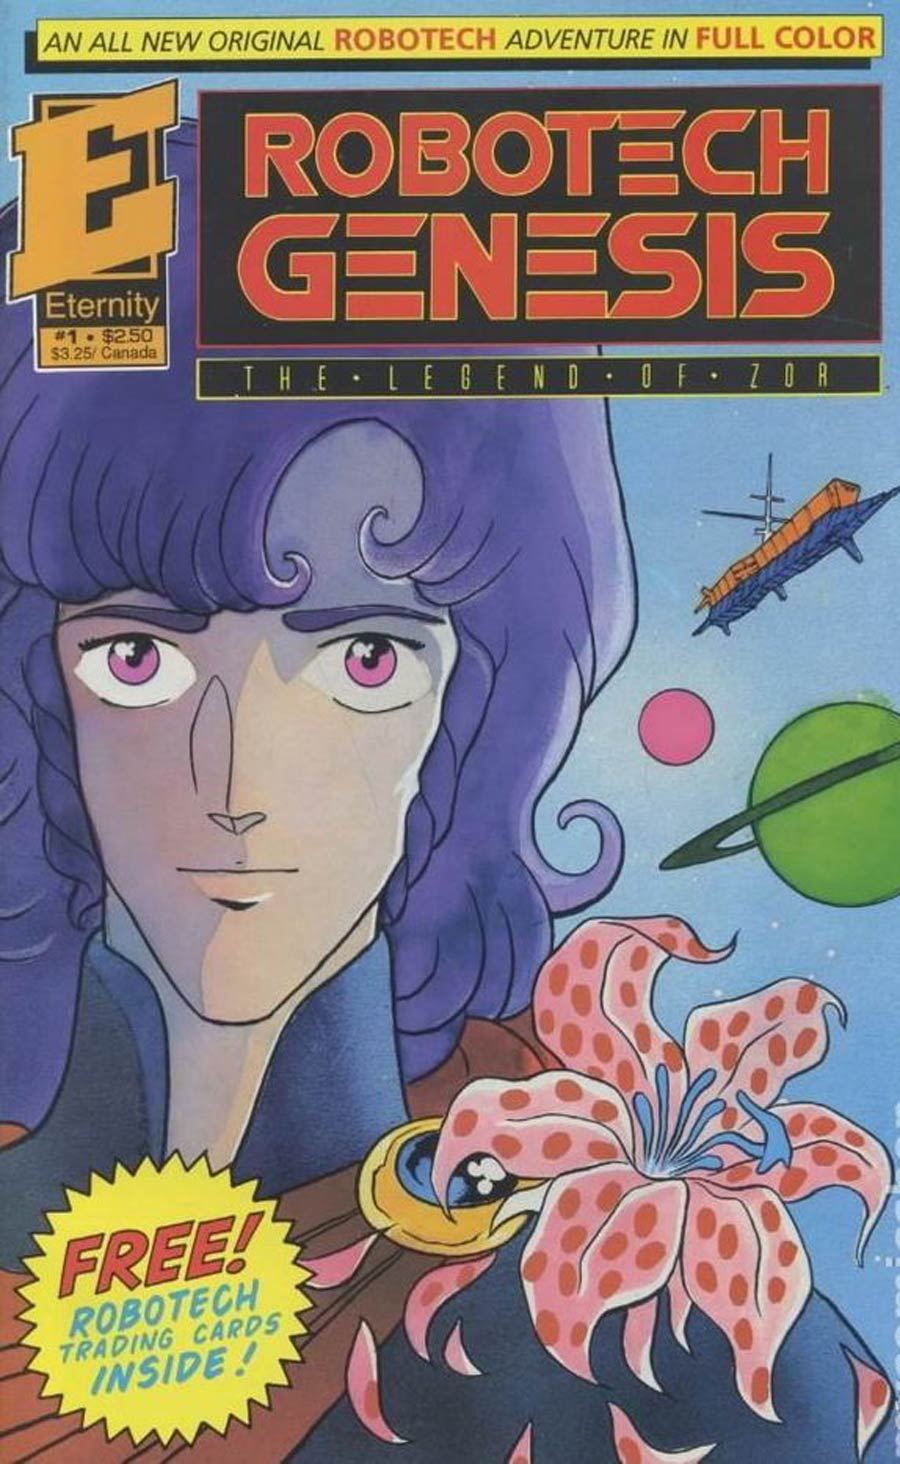 Robotech Genesis The Legend Of Zor #1 Cover A Regular Edition With Cards